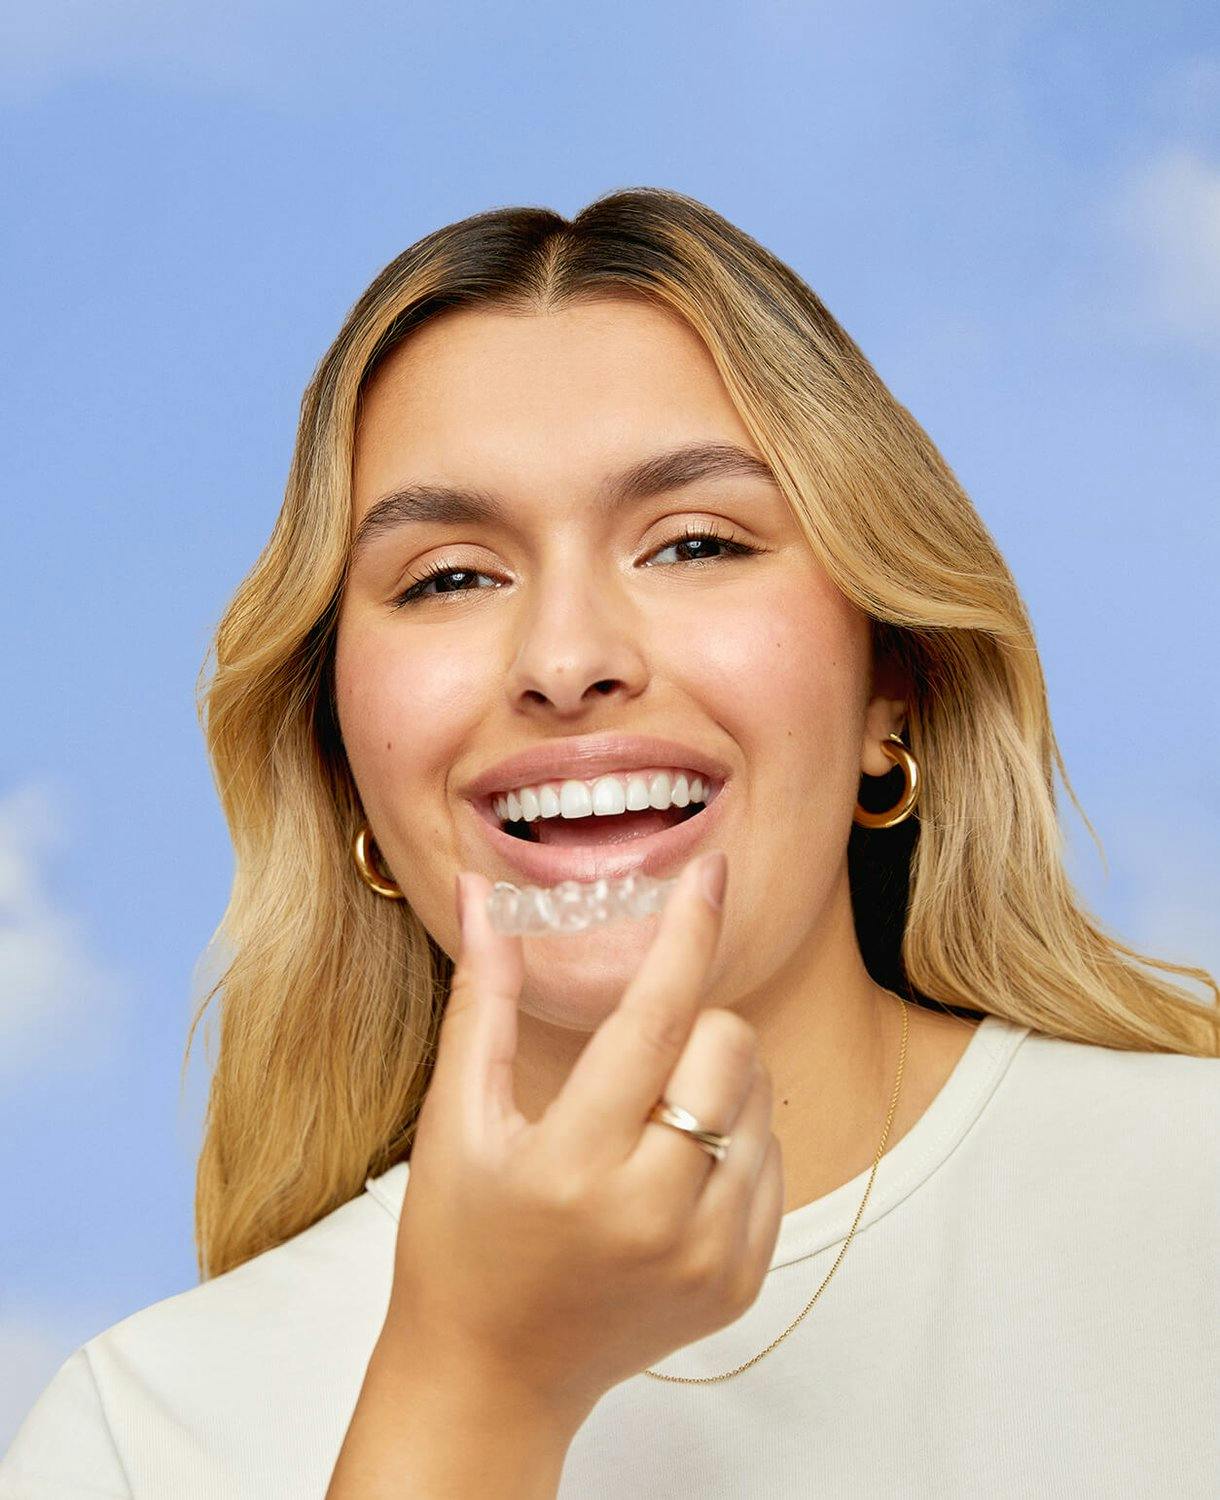 woman smiling holding an aligner